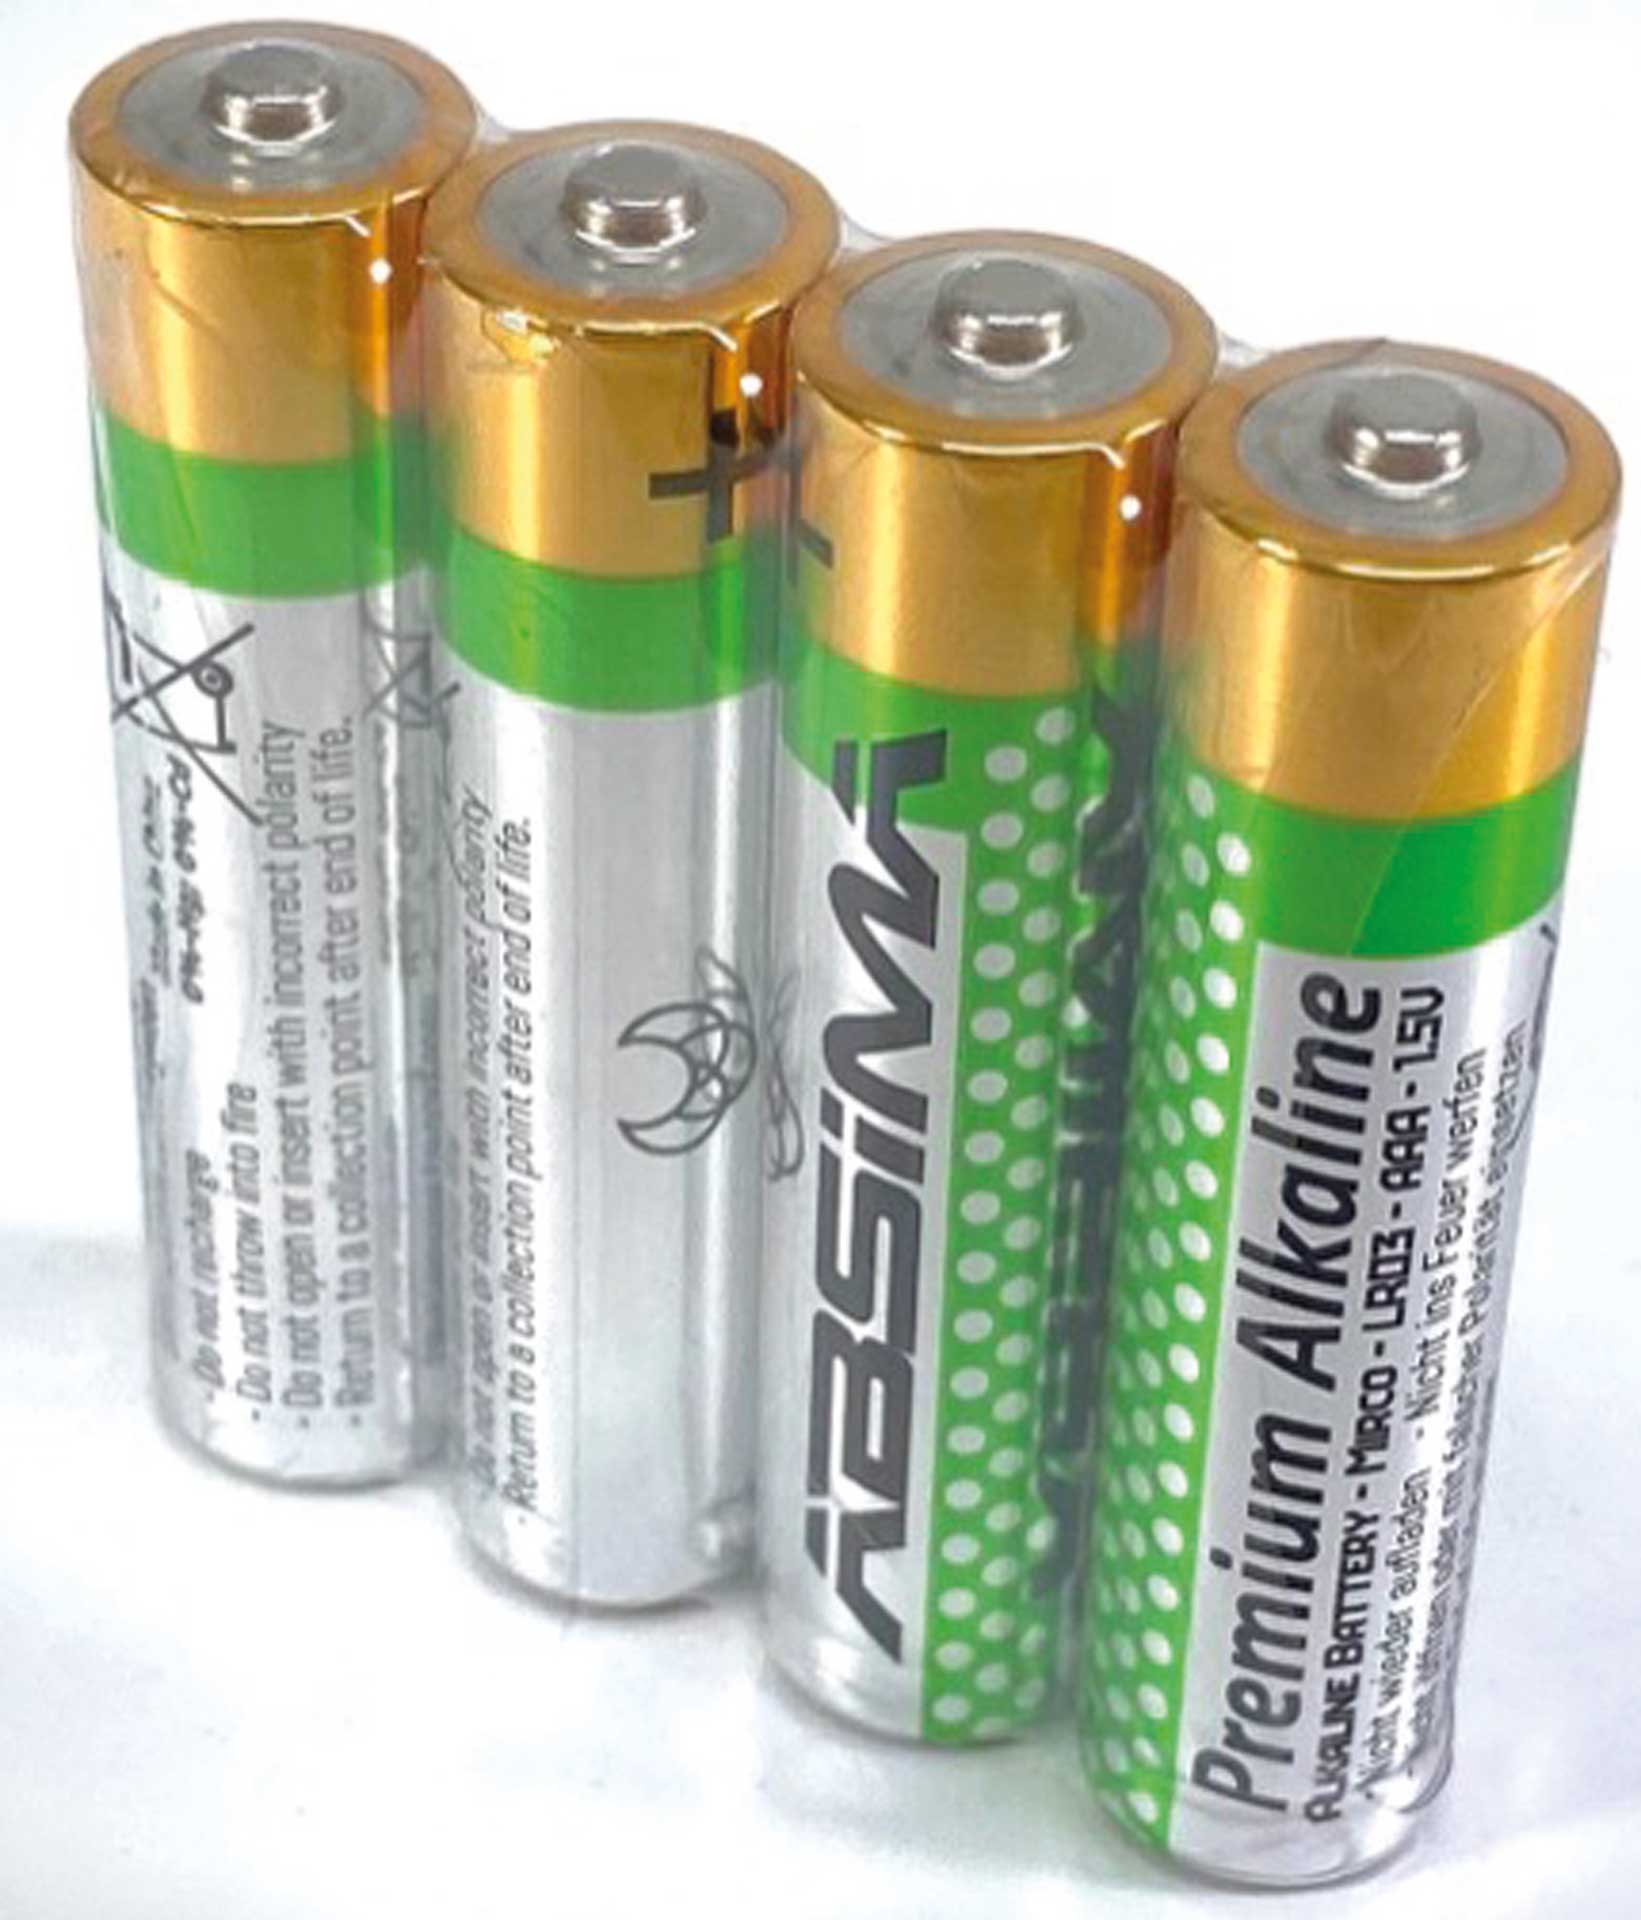 AAA/Micro Premium Alkaline 1.5V LR03 (Pack of 40), NiMH Batteries, Charging Technology & Battery